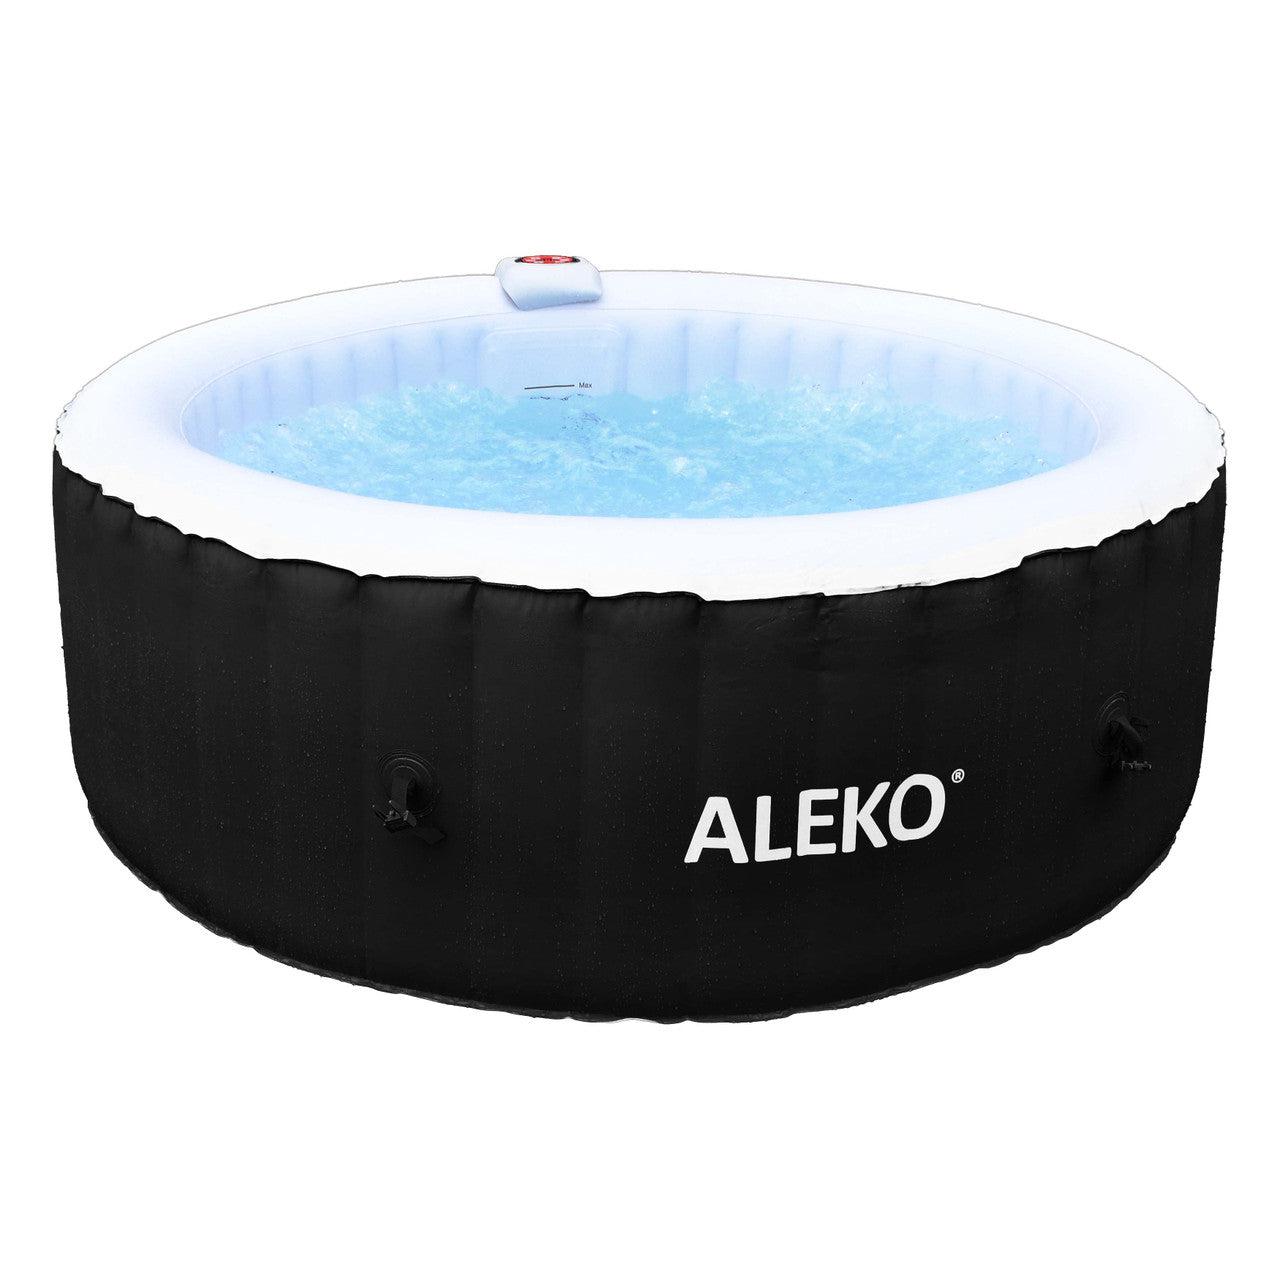 ALEKO 4 Person Black 210 Gallon Round Inflatable Jetted Hot Tub with Cover - Purely Relaxation